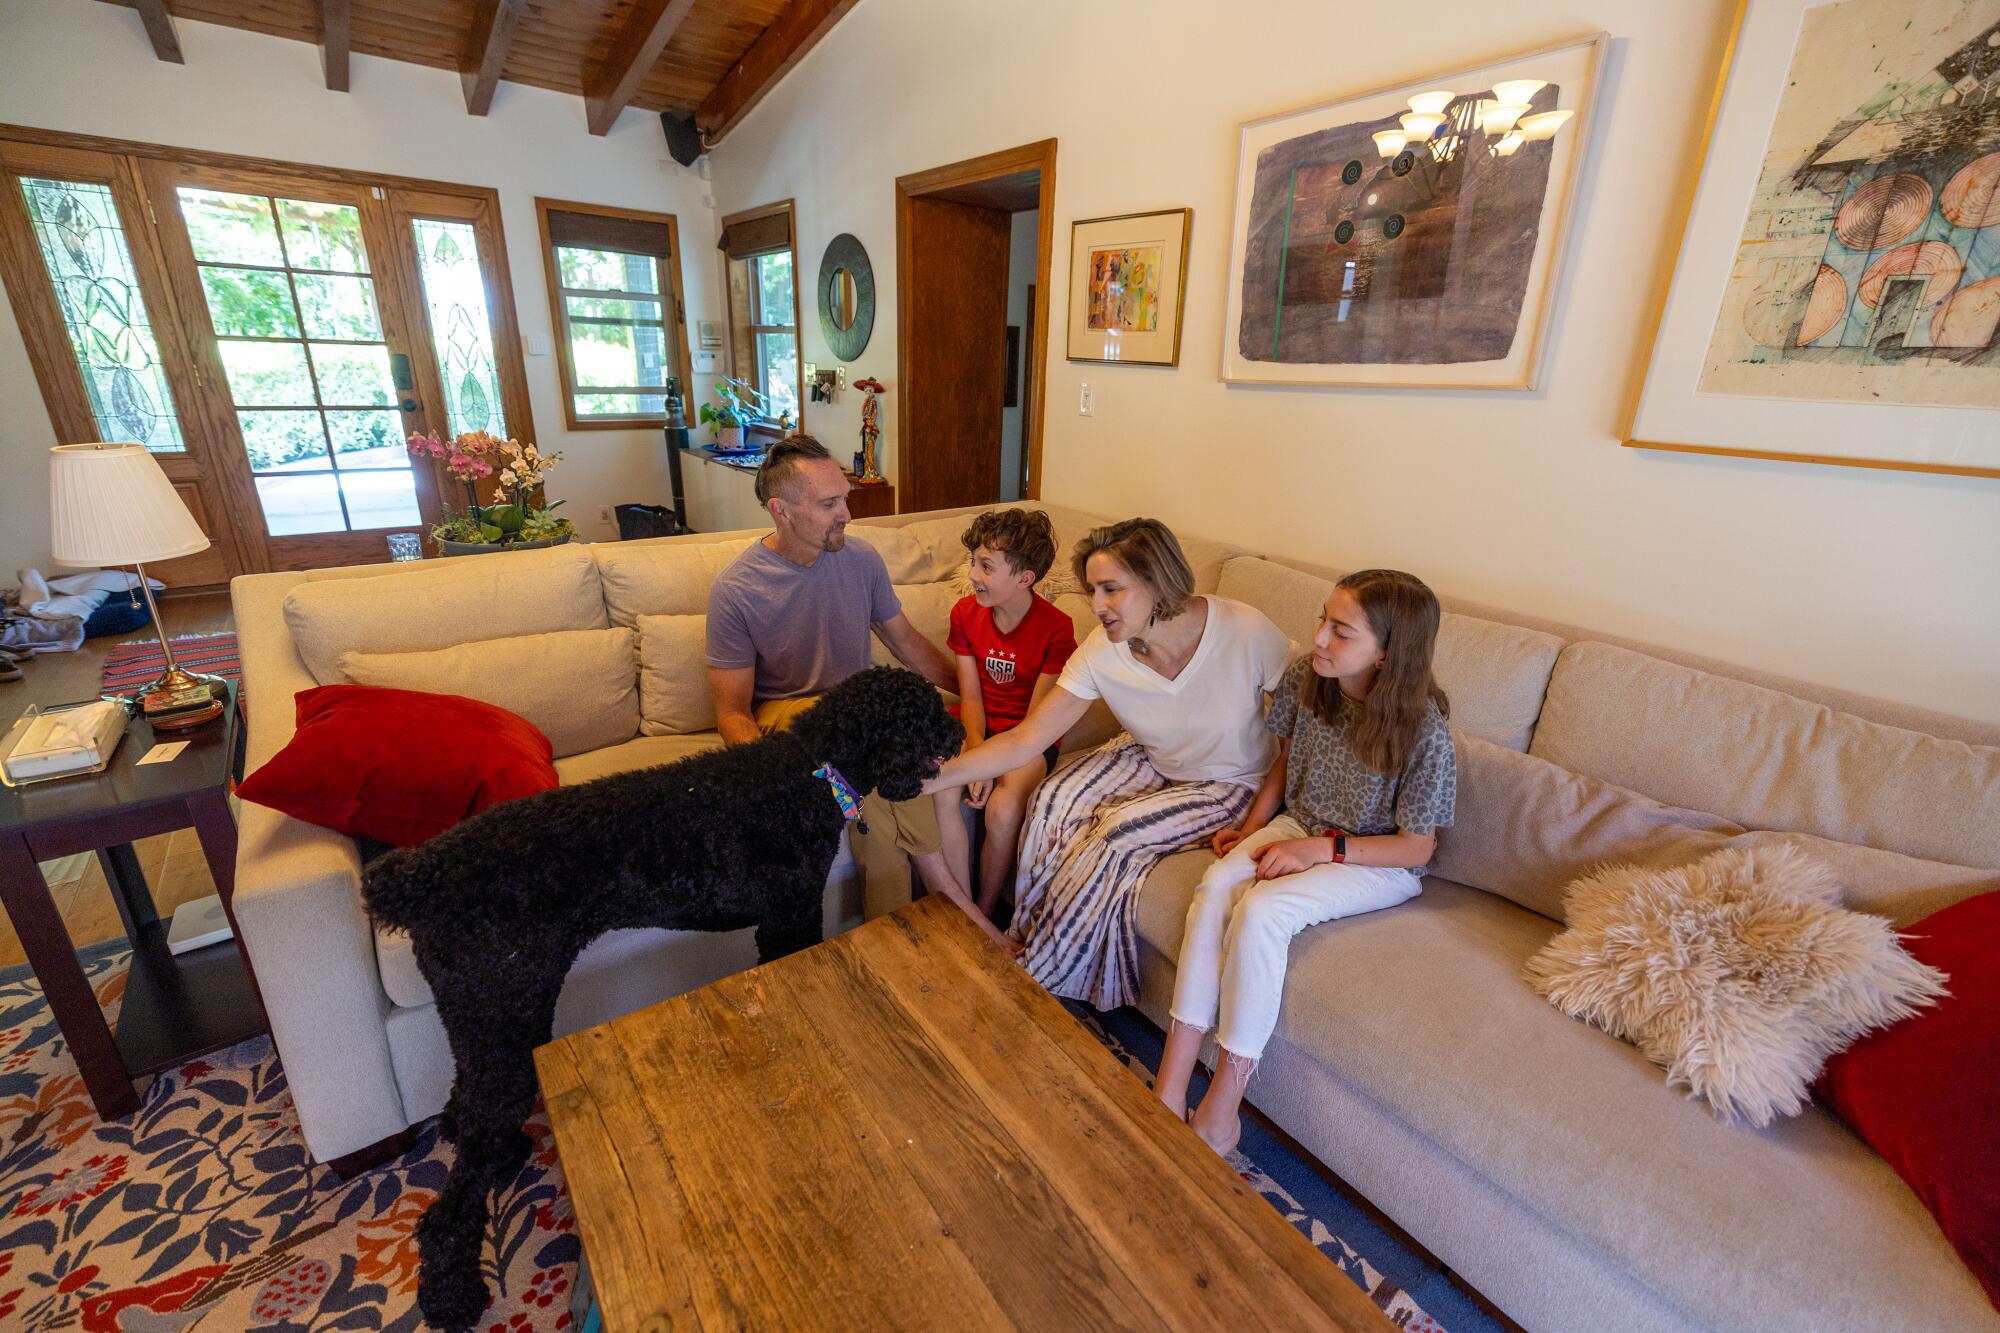 Family members sit on a sectional and pet their dog.